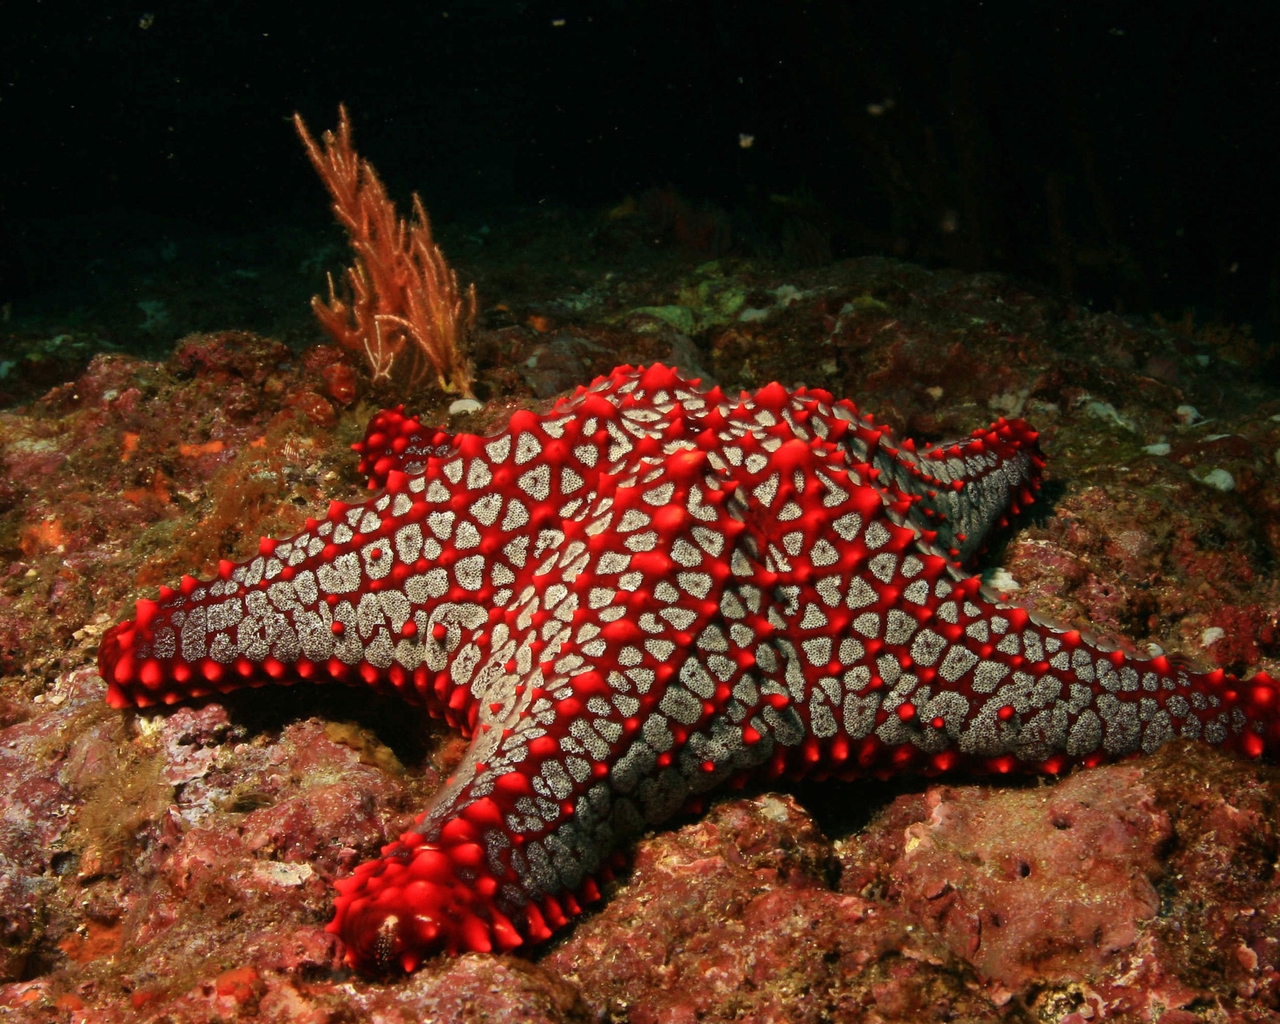 Red Sea Star for 1280 x 1024 resolution